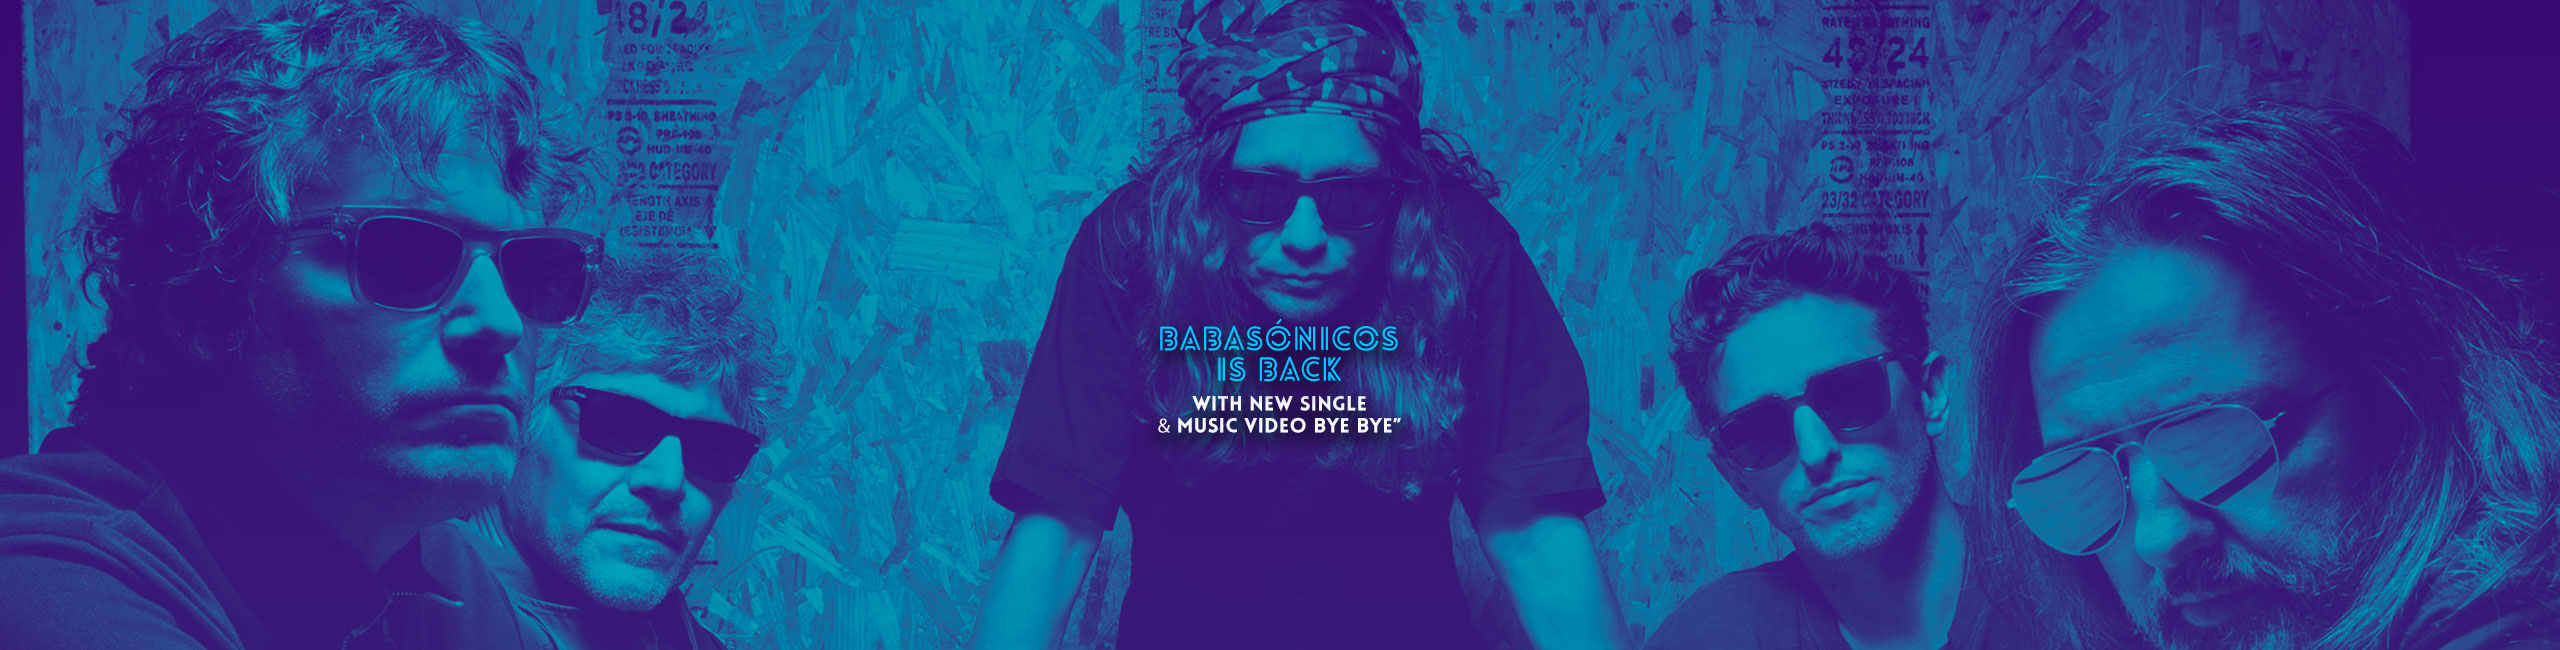 BABASÓNICOS IS BACK WITH NEW SINGLE & MUSIC VIDEO BYE BYE”